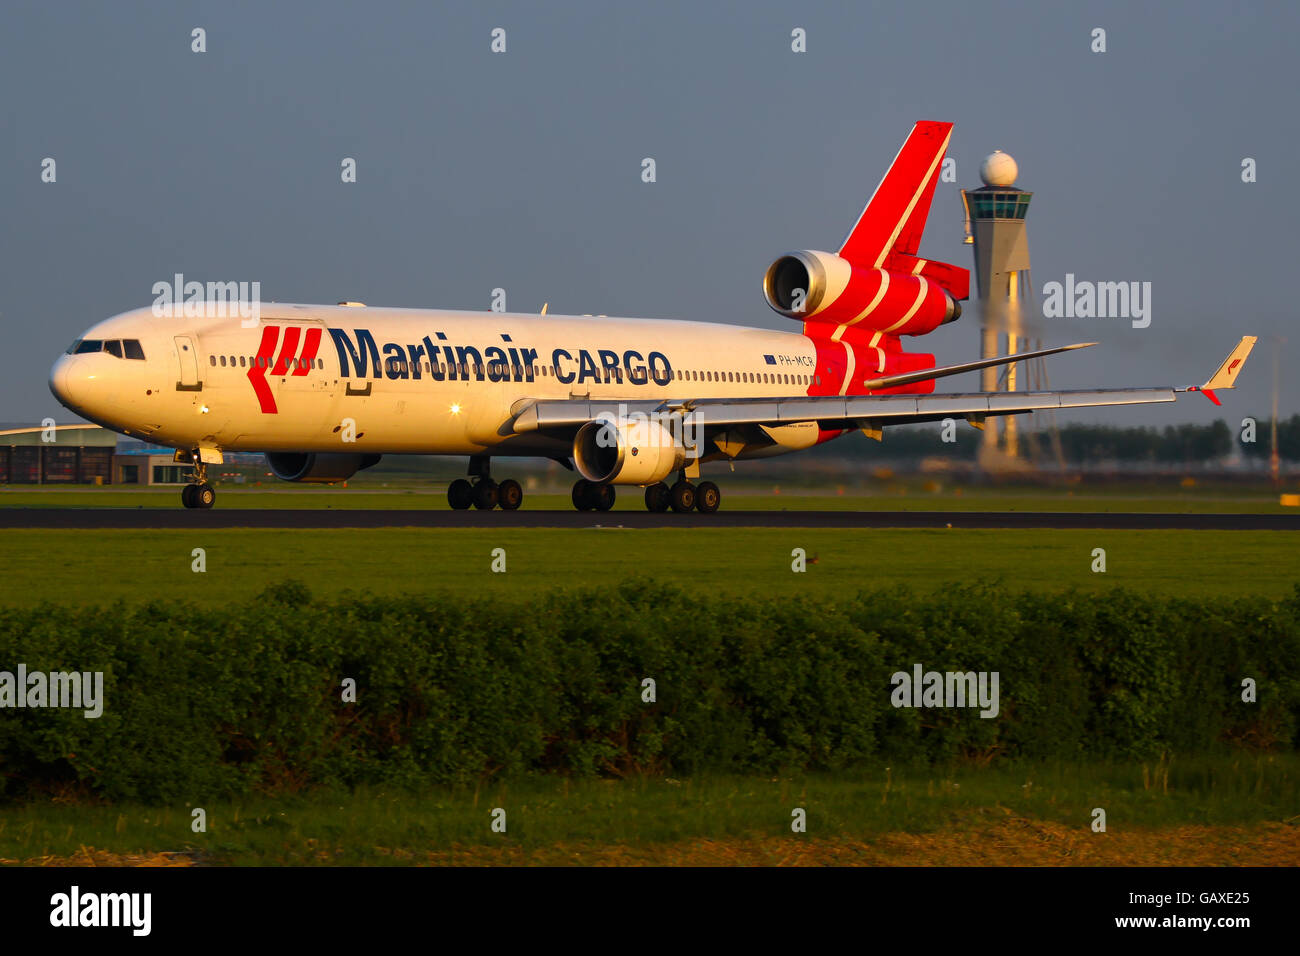 Martinair Cargo McDonnell Douglas MD-11 Freighter departing Amsterdam in the evening light. Stock Photo